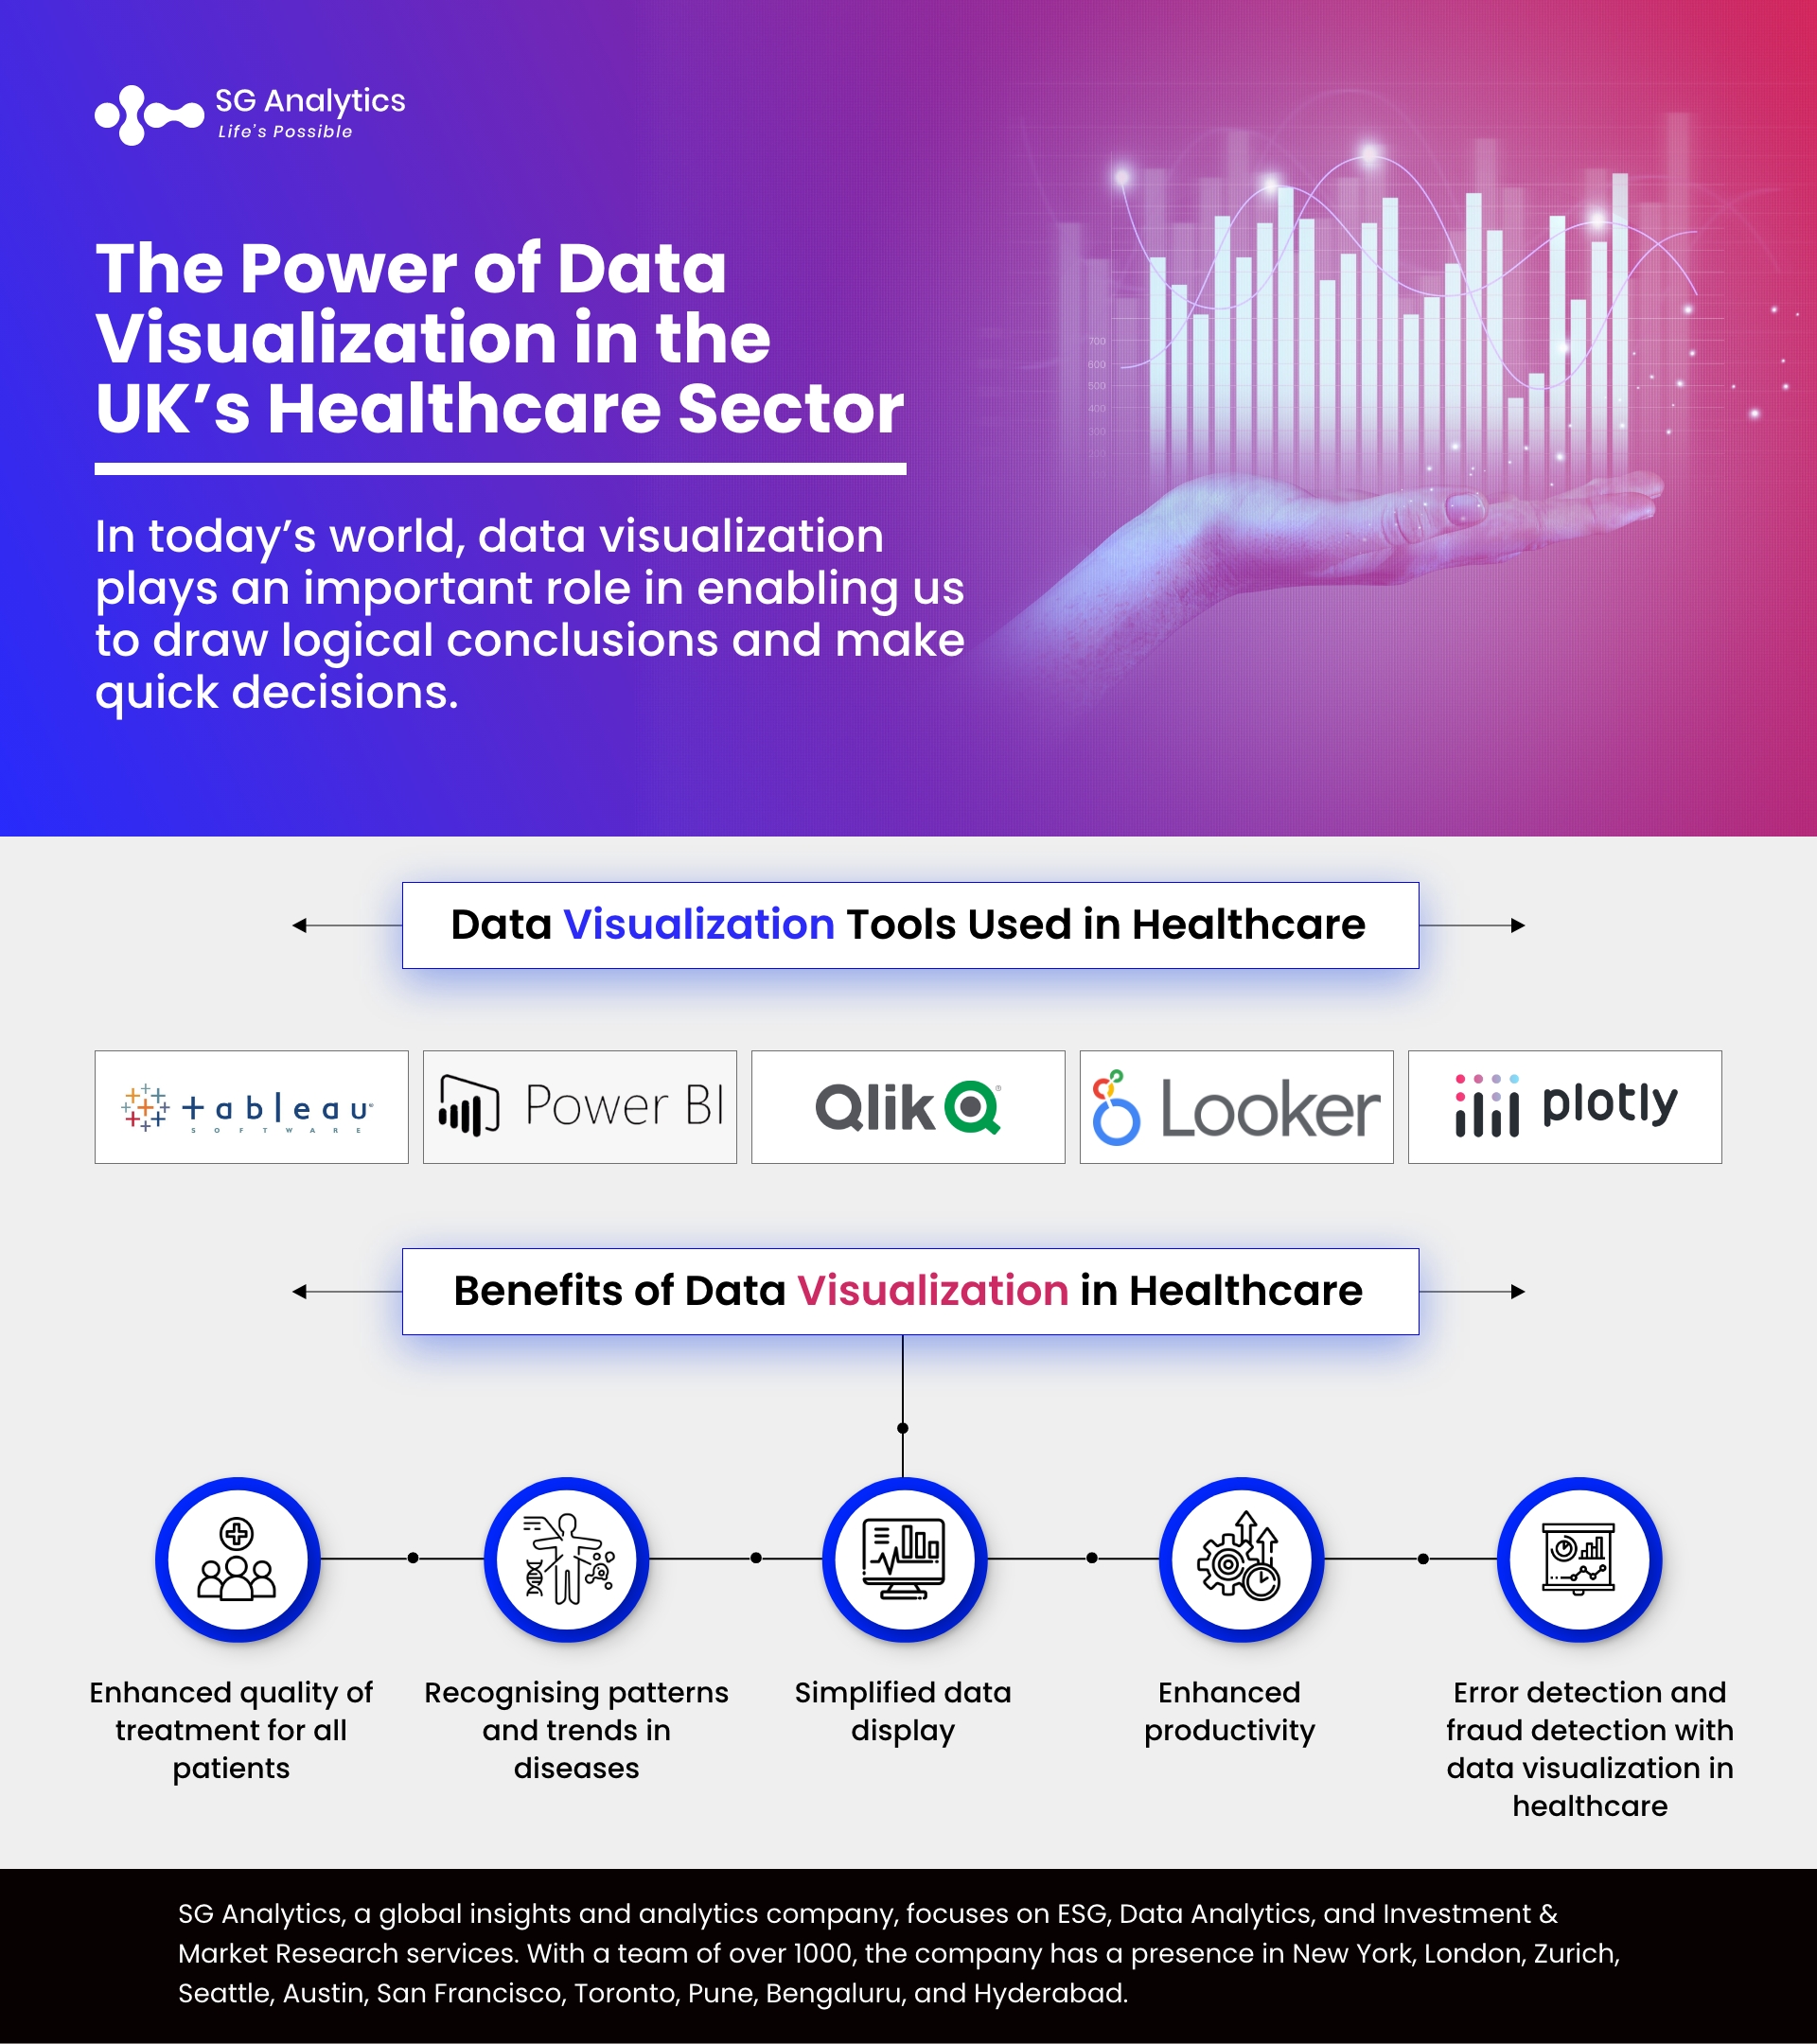 The Power of Data Visualization in the UK's Healthcare Sector